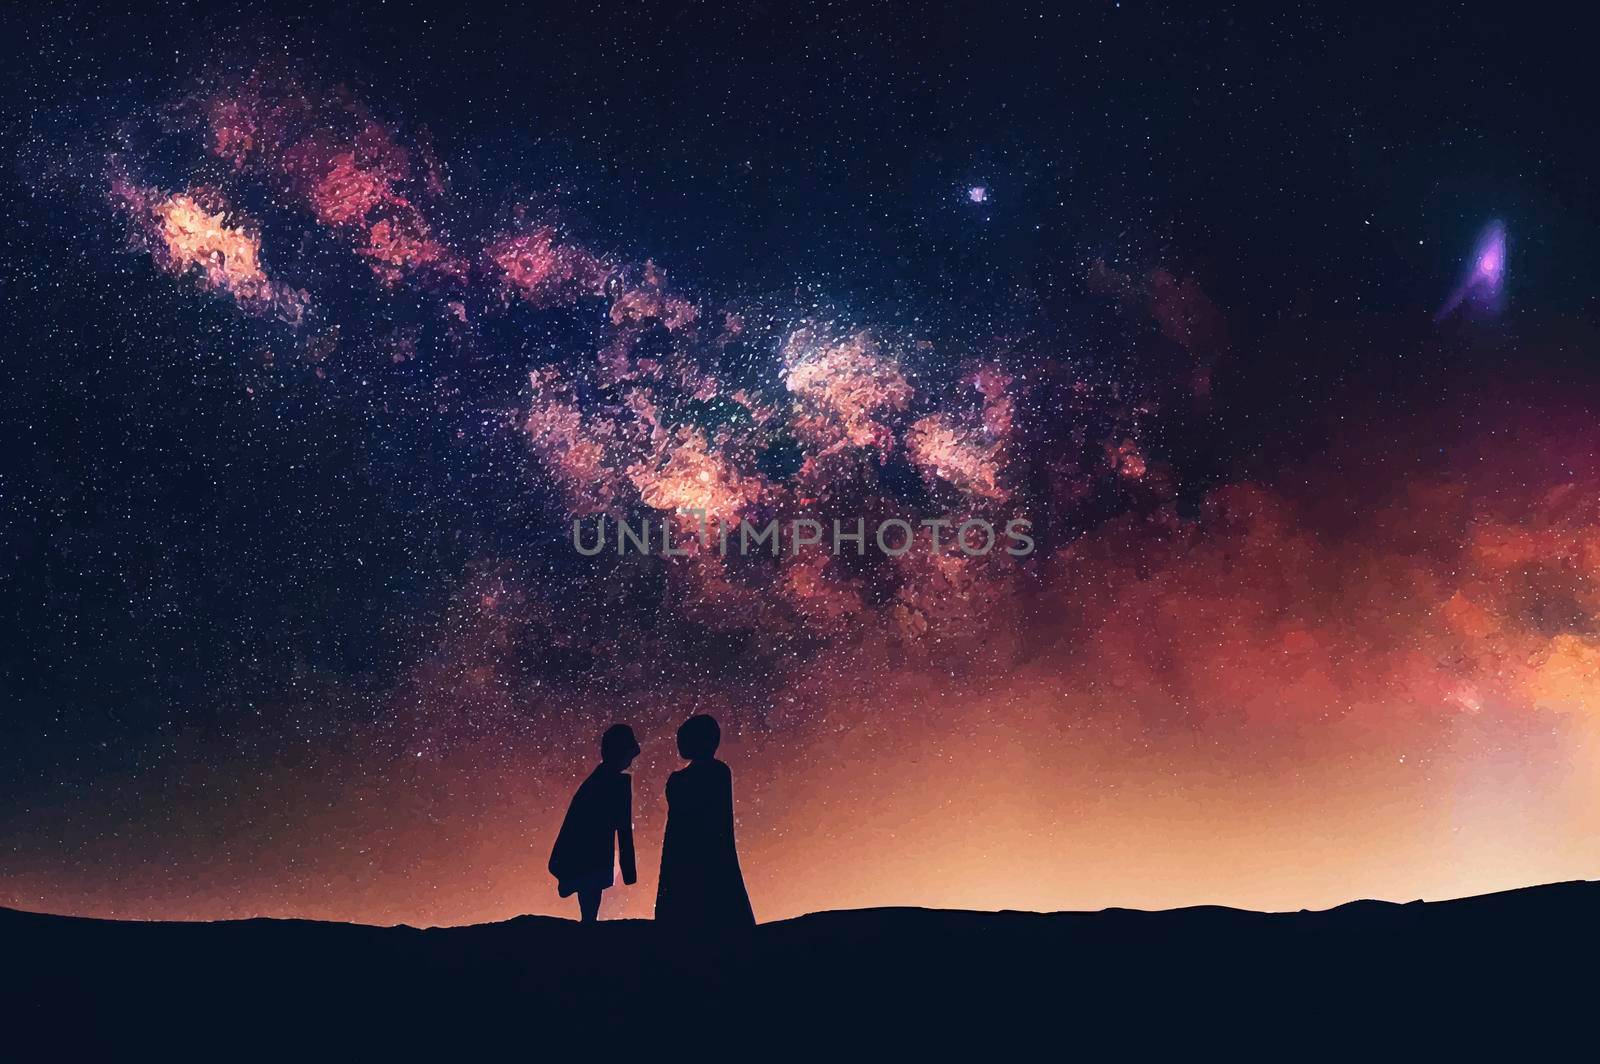 silhouette of couple with night scene milky way background in the galaxy.